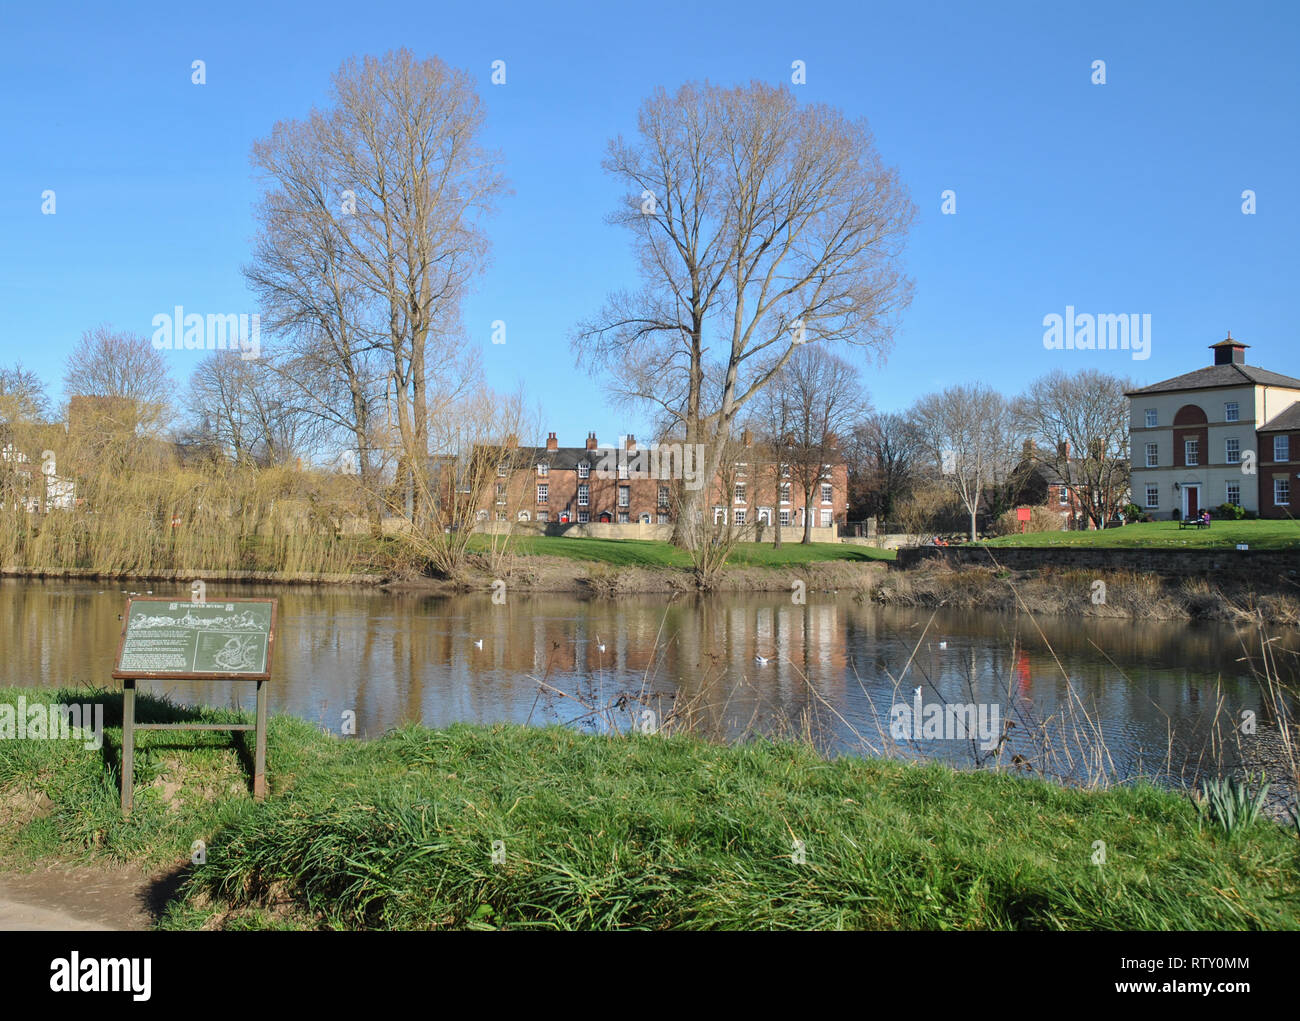 Two large trees alongside where the Rea Brook joins the River Severn in Shrewsbury, Shropshire showing reflection in the water Stock Photo